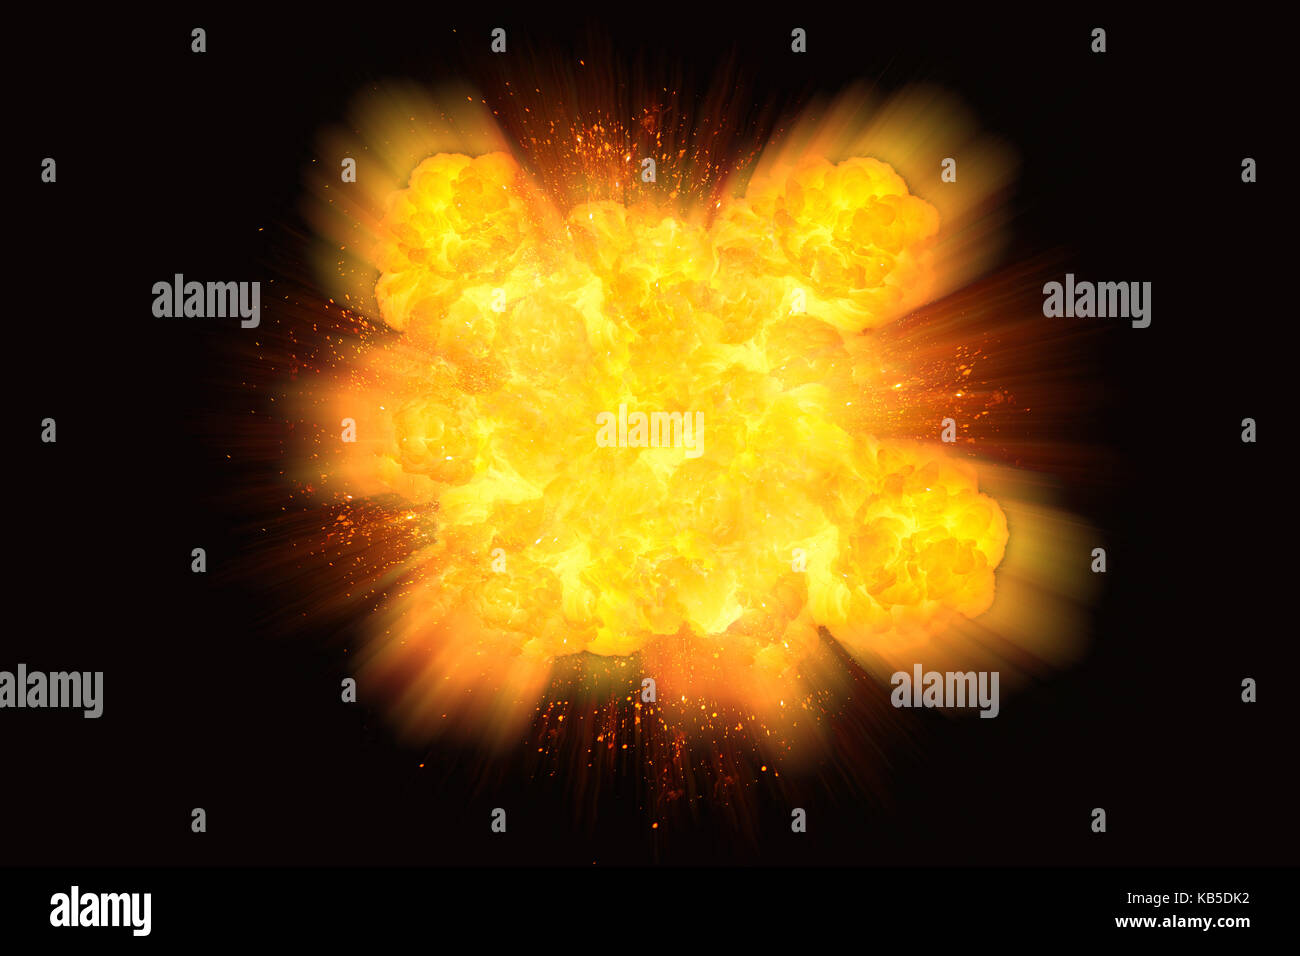 Extremely massive fire explosion, orange color with sparks isolated on black background Stock Photo